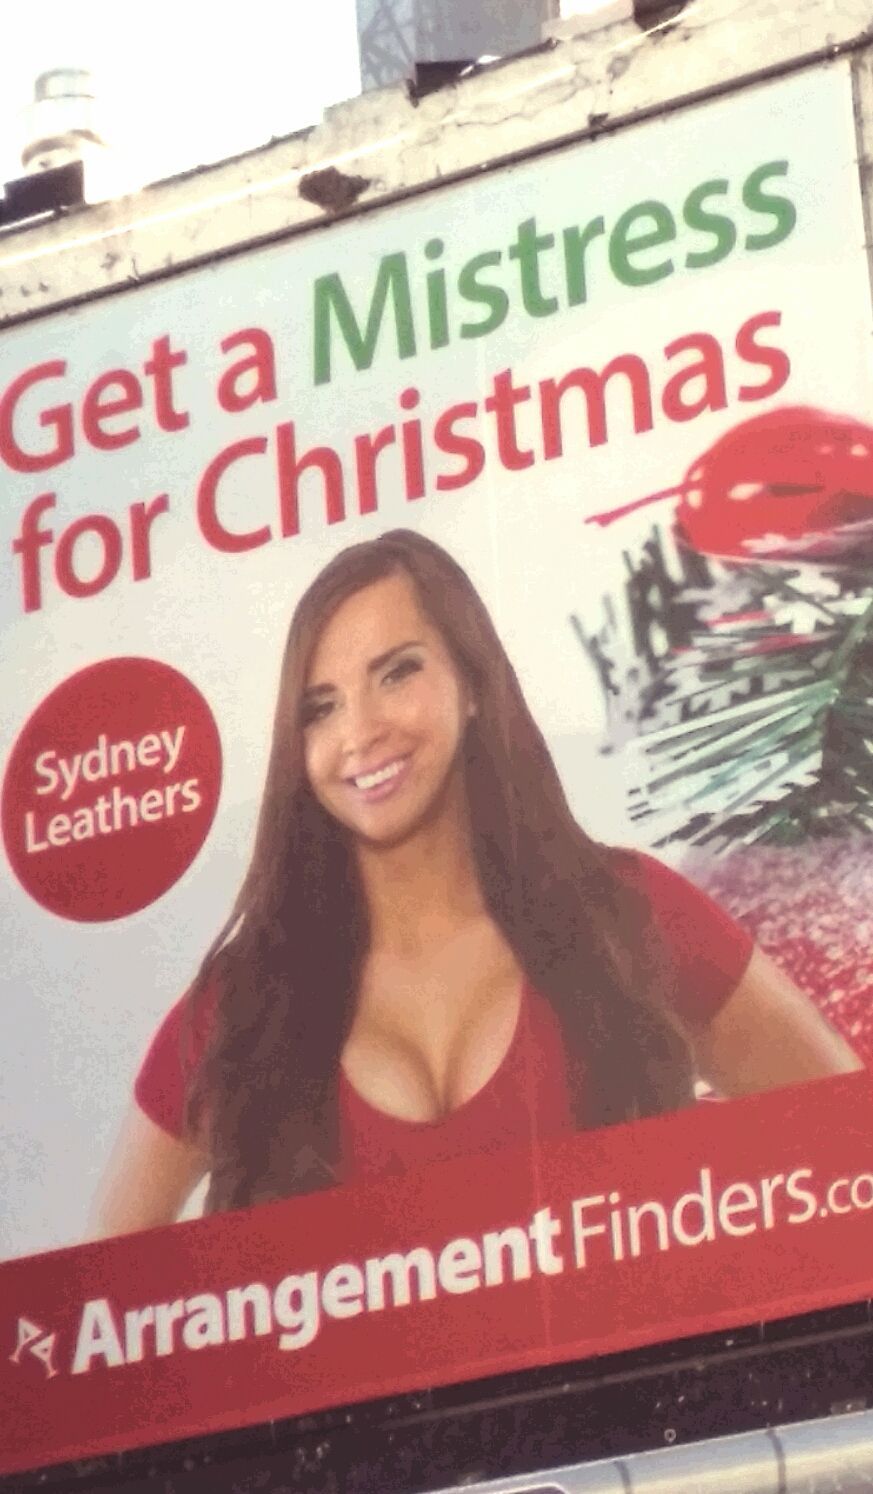 Sydney Leathers can help you through the Holland Tunnel/tunnel of matrimony.